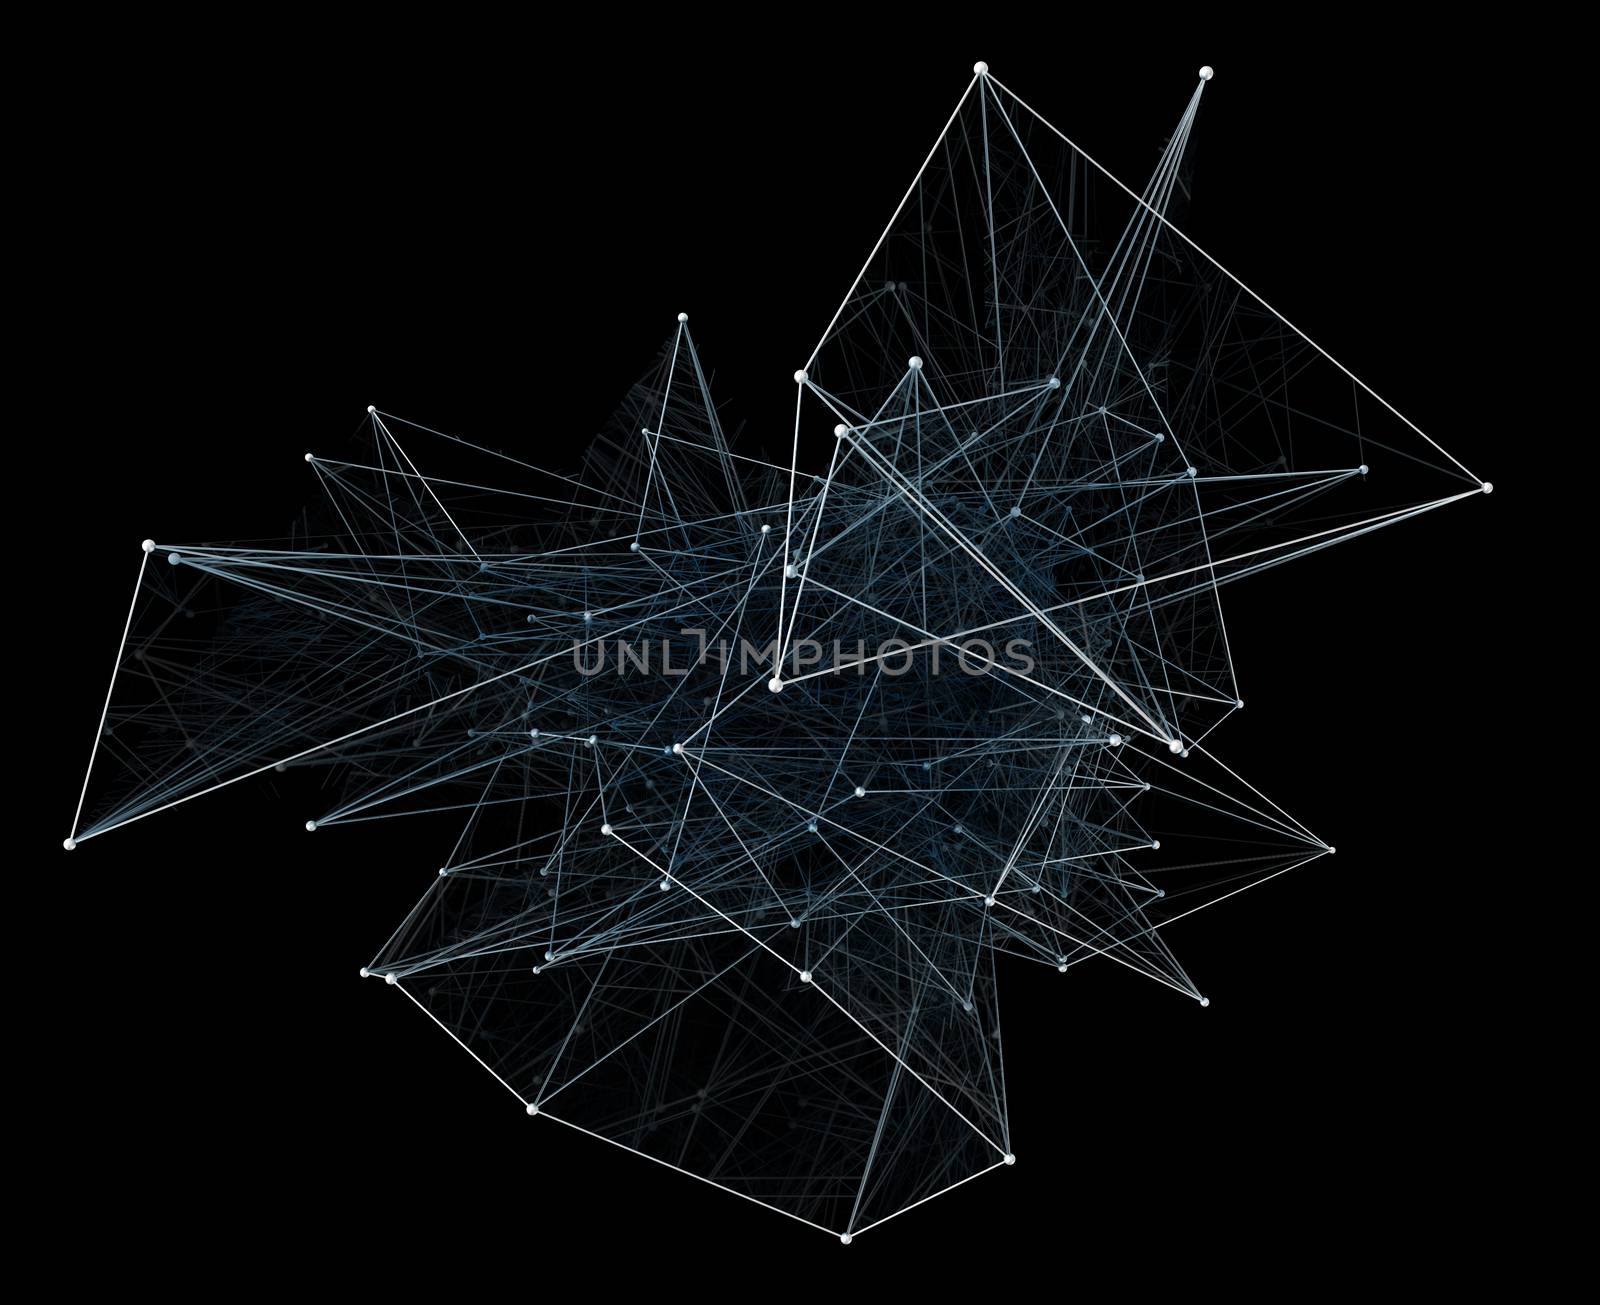 Abstract network connection on black background. 3D illustration